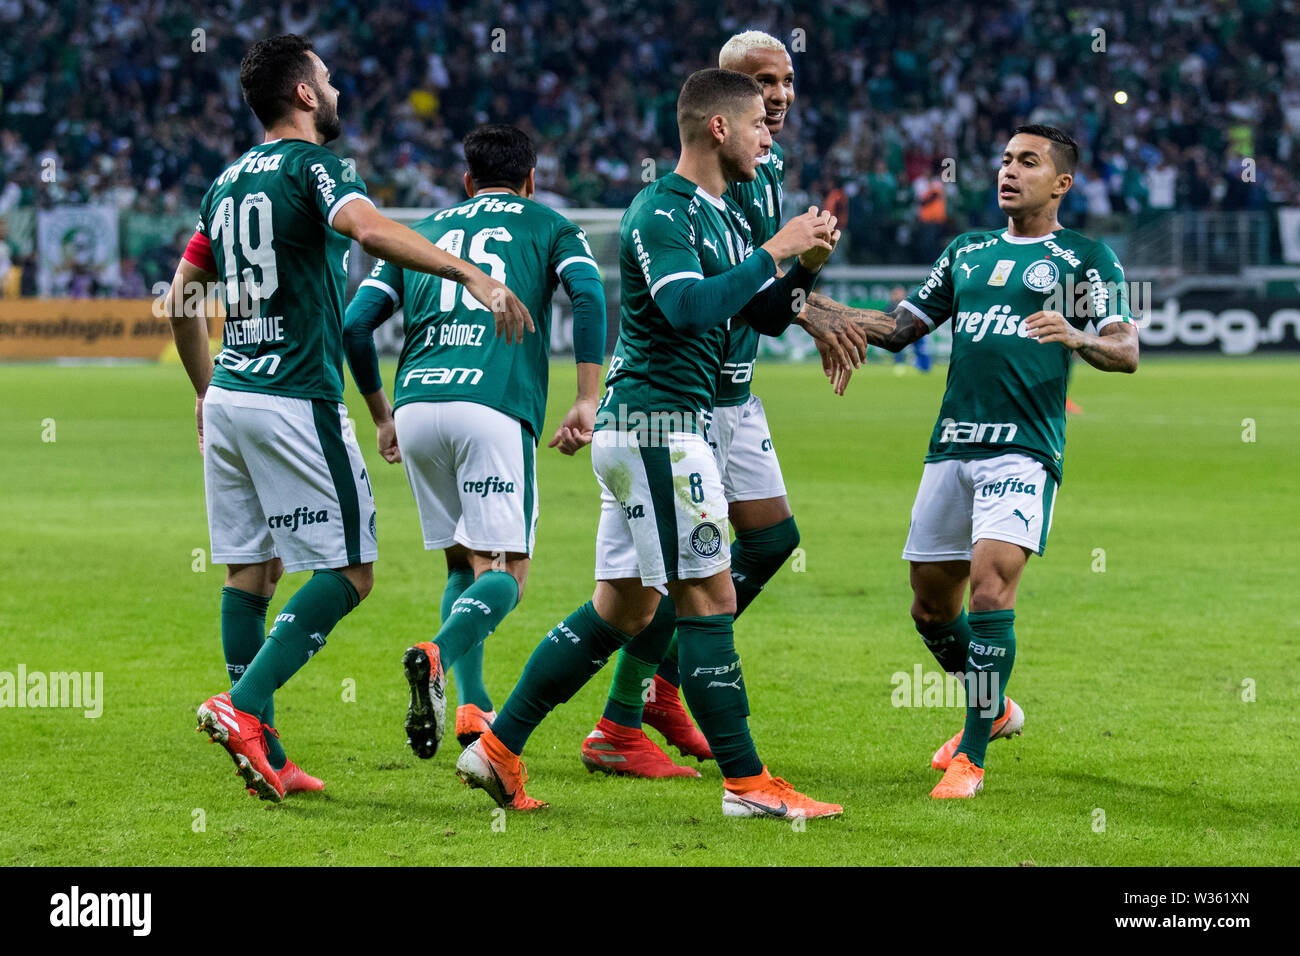 Zé Rafael, a Palmeiras player, celebrates his goal during a match between Palmeiras and Internacional, validated by the quarterfinals of the Continent Stock Photo